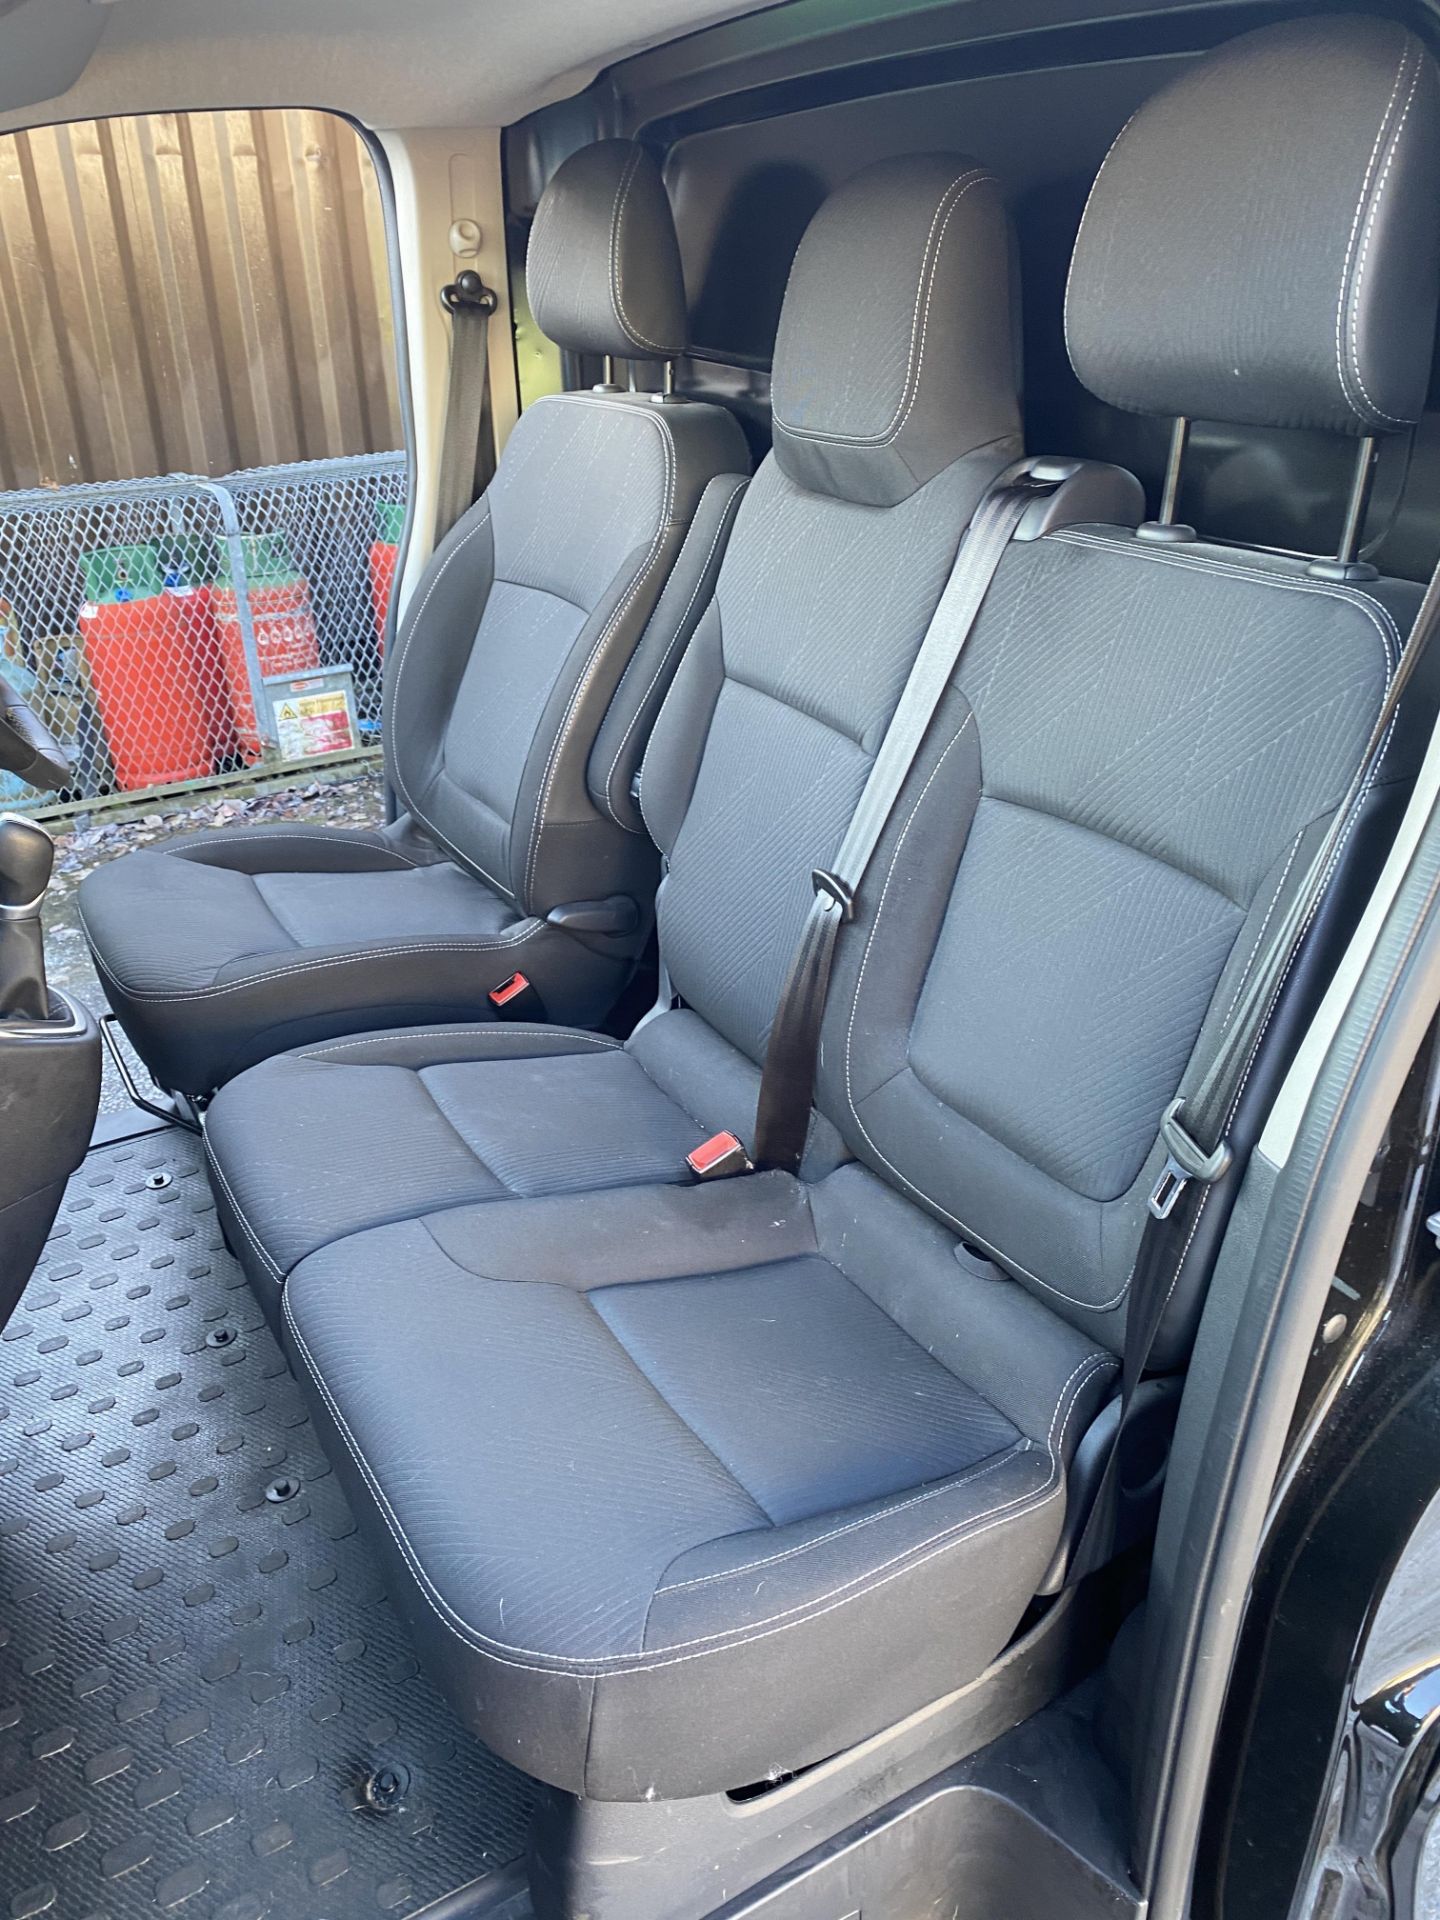 RENAULT TRAFIC LL30BLK ED ENGY D PANEL VAN - AUTOMATIC - Diesel - Black. - Image 18 of 45